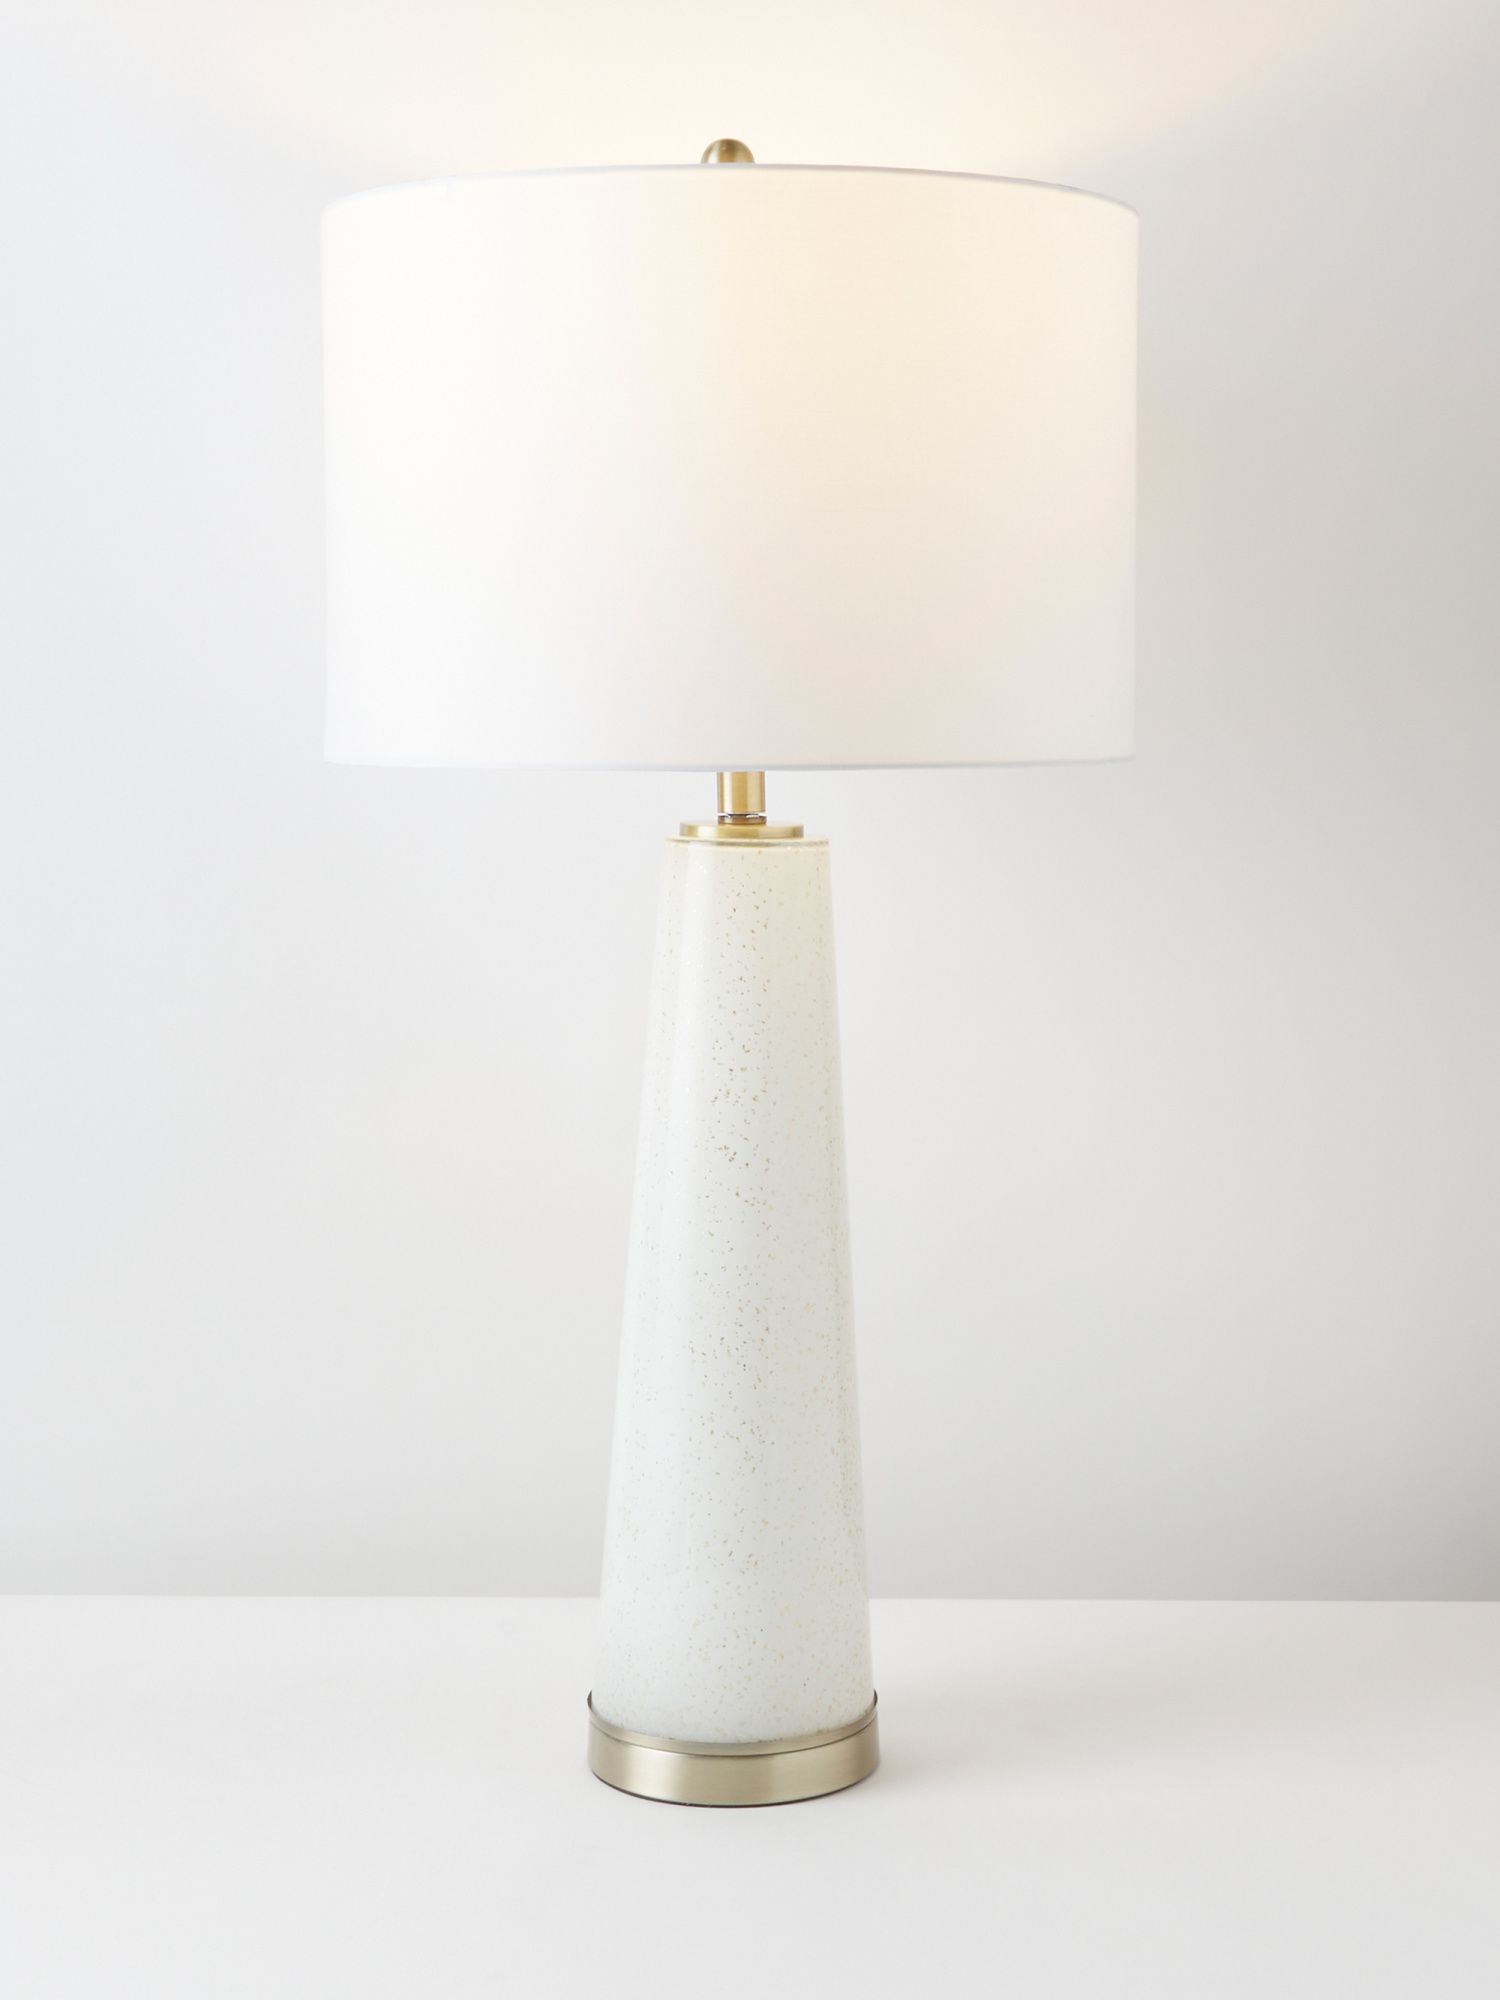 34in Glass And Metal Table Lamp | Table Lamps | HomeGoods | HomeGoods